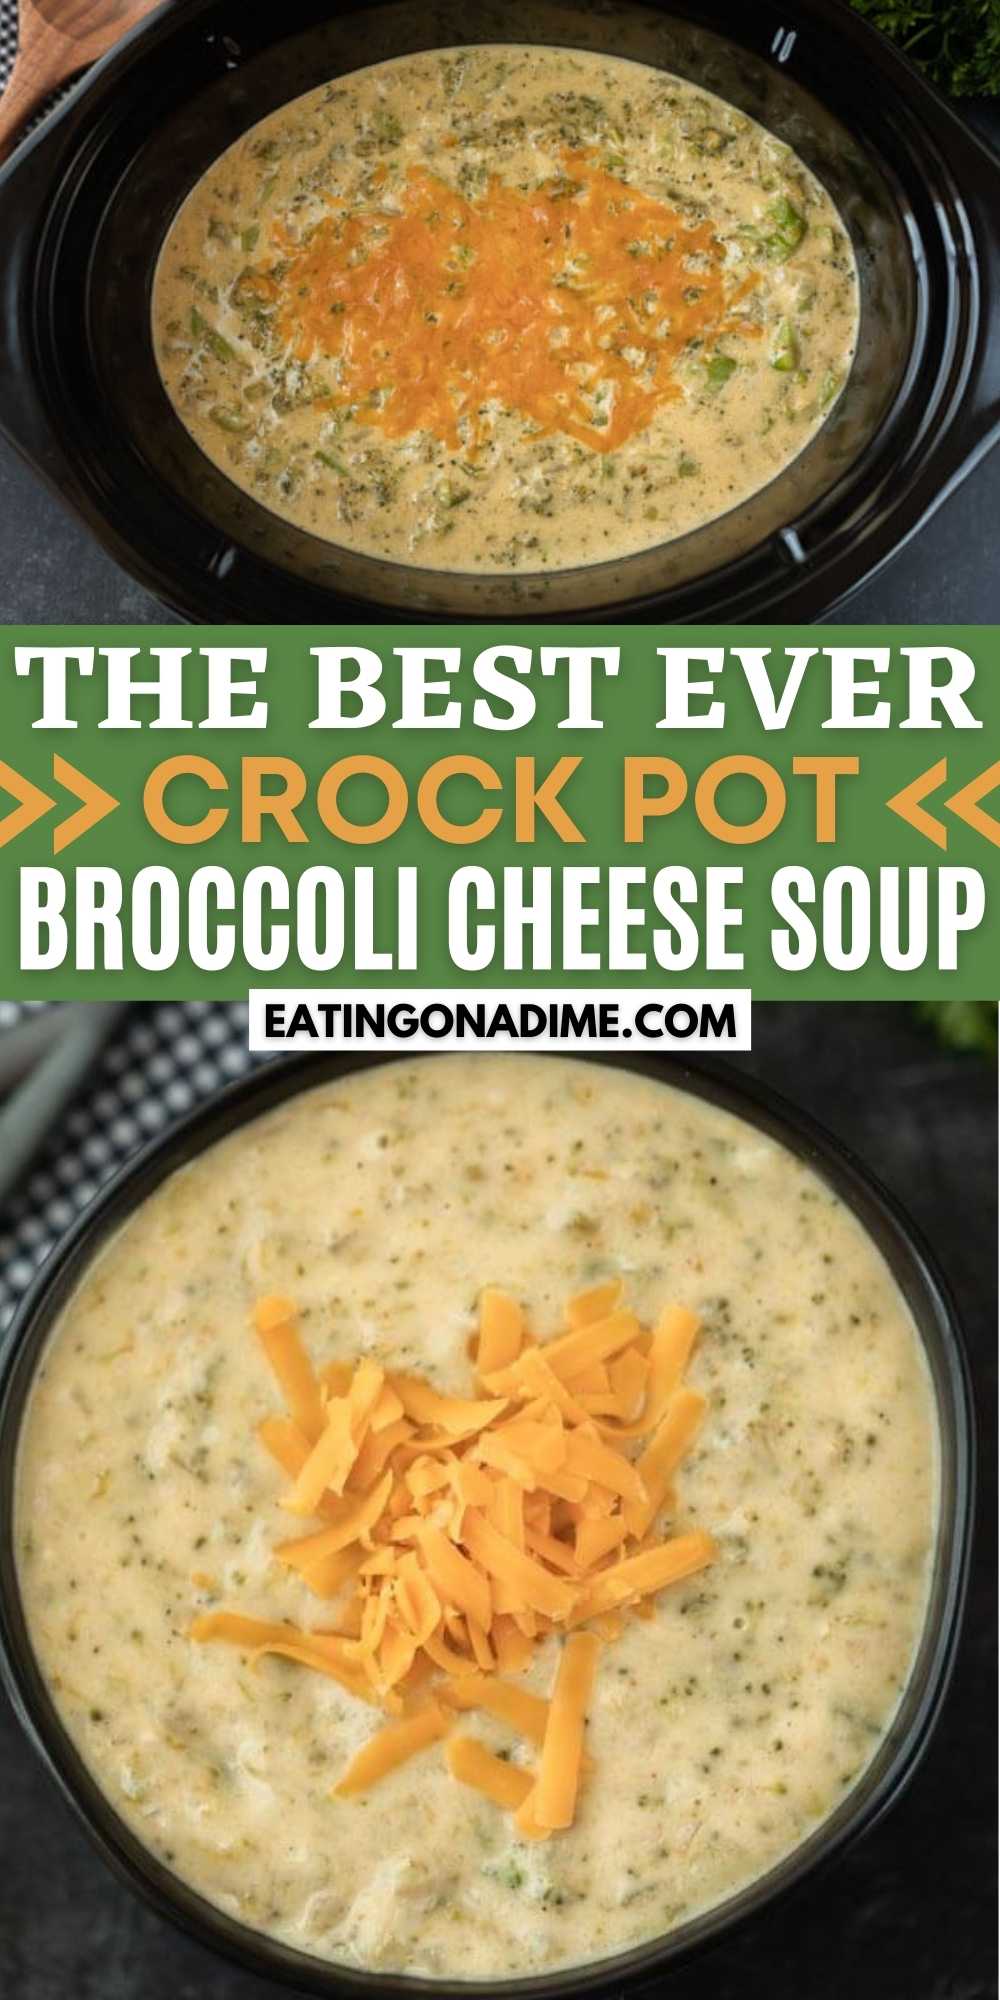 The Best Crockpot Broccoli Cheese Soup